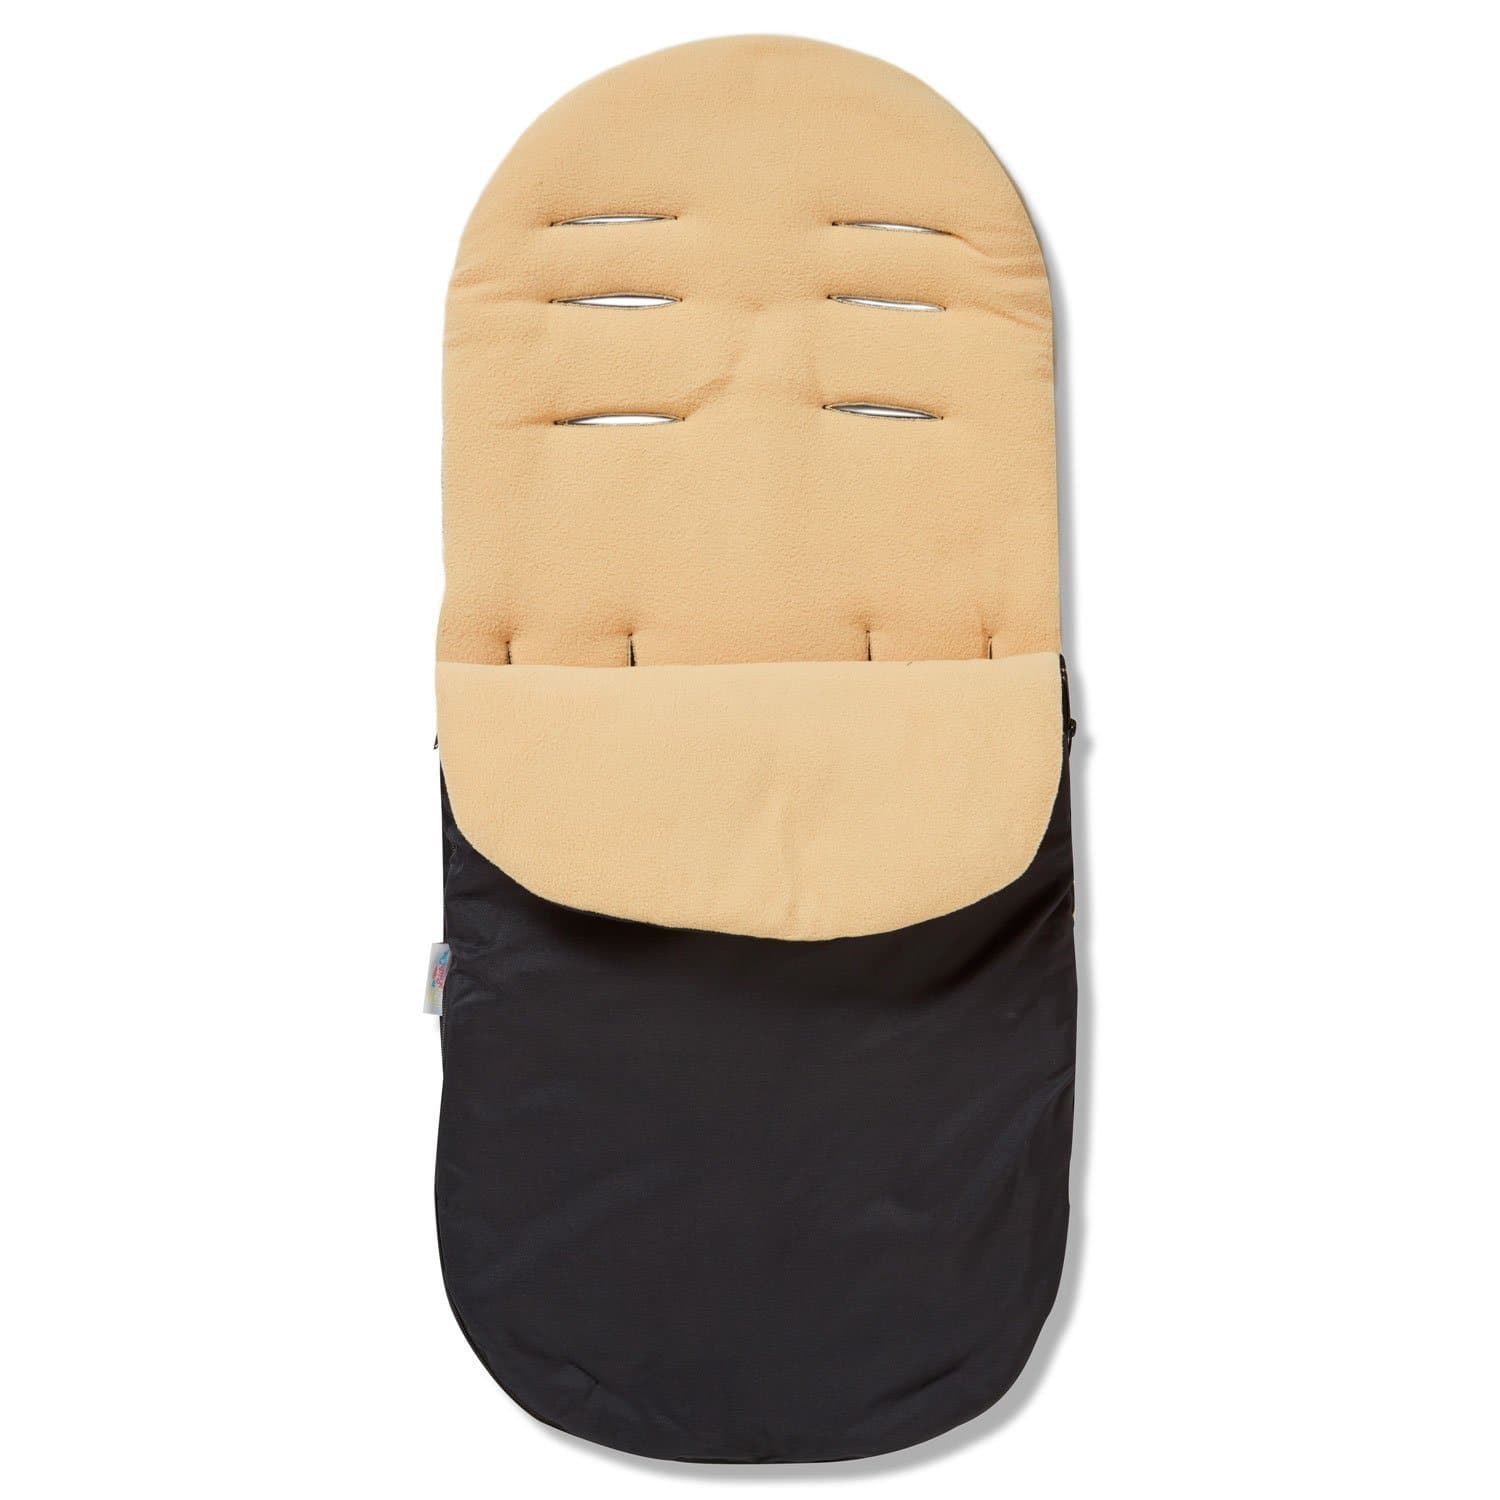 Footmuff / Cosy Toes Compatible with Bebecar Sand Fits All Models 